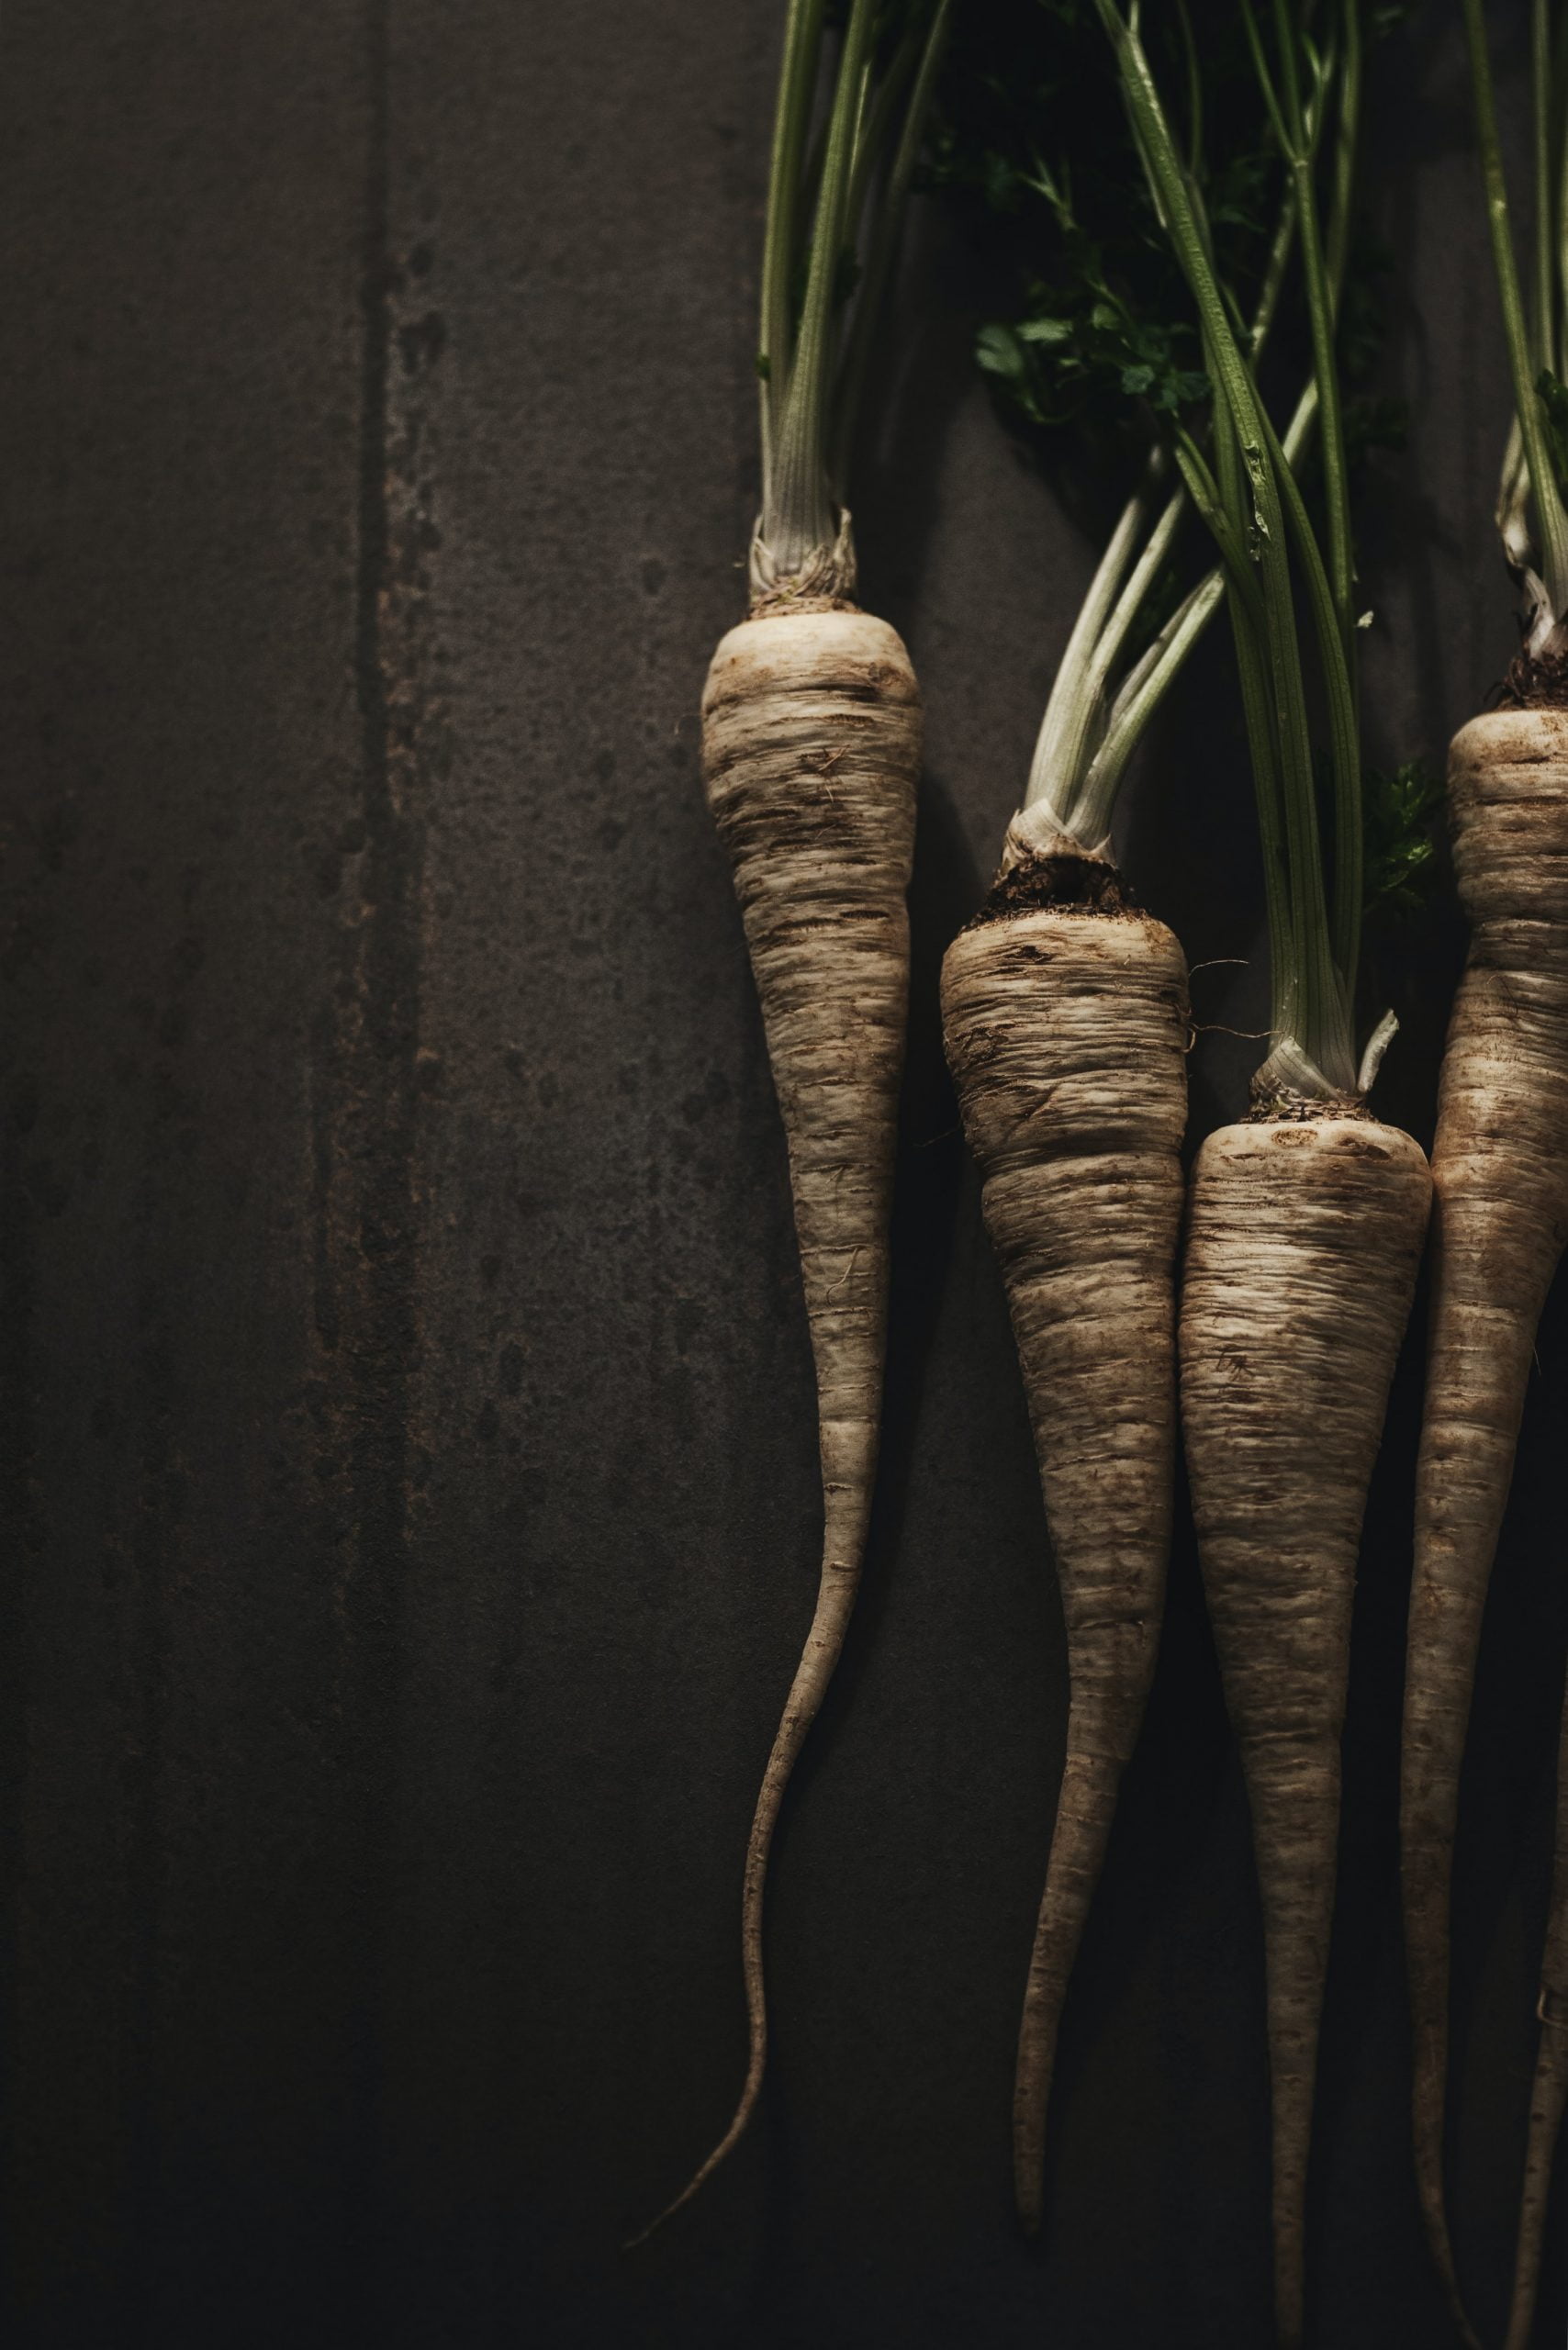 Why Do Parsnips Fork?